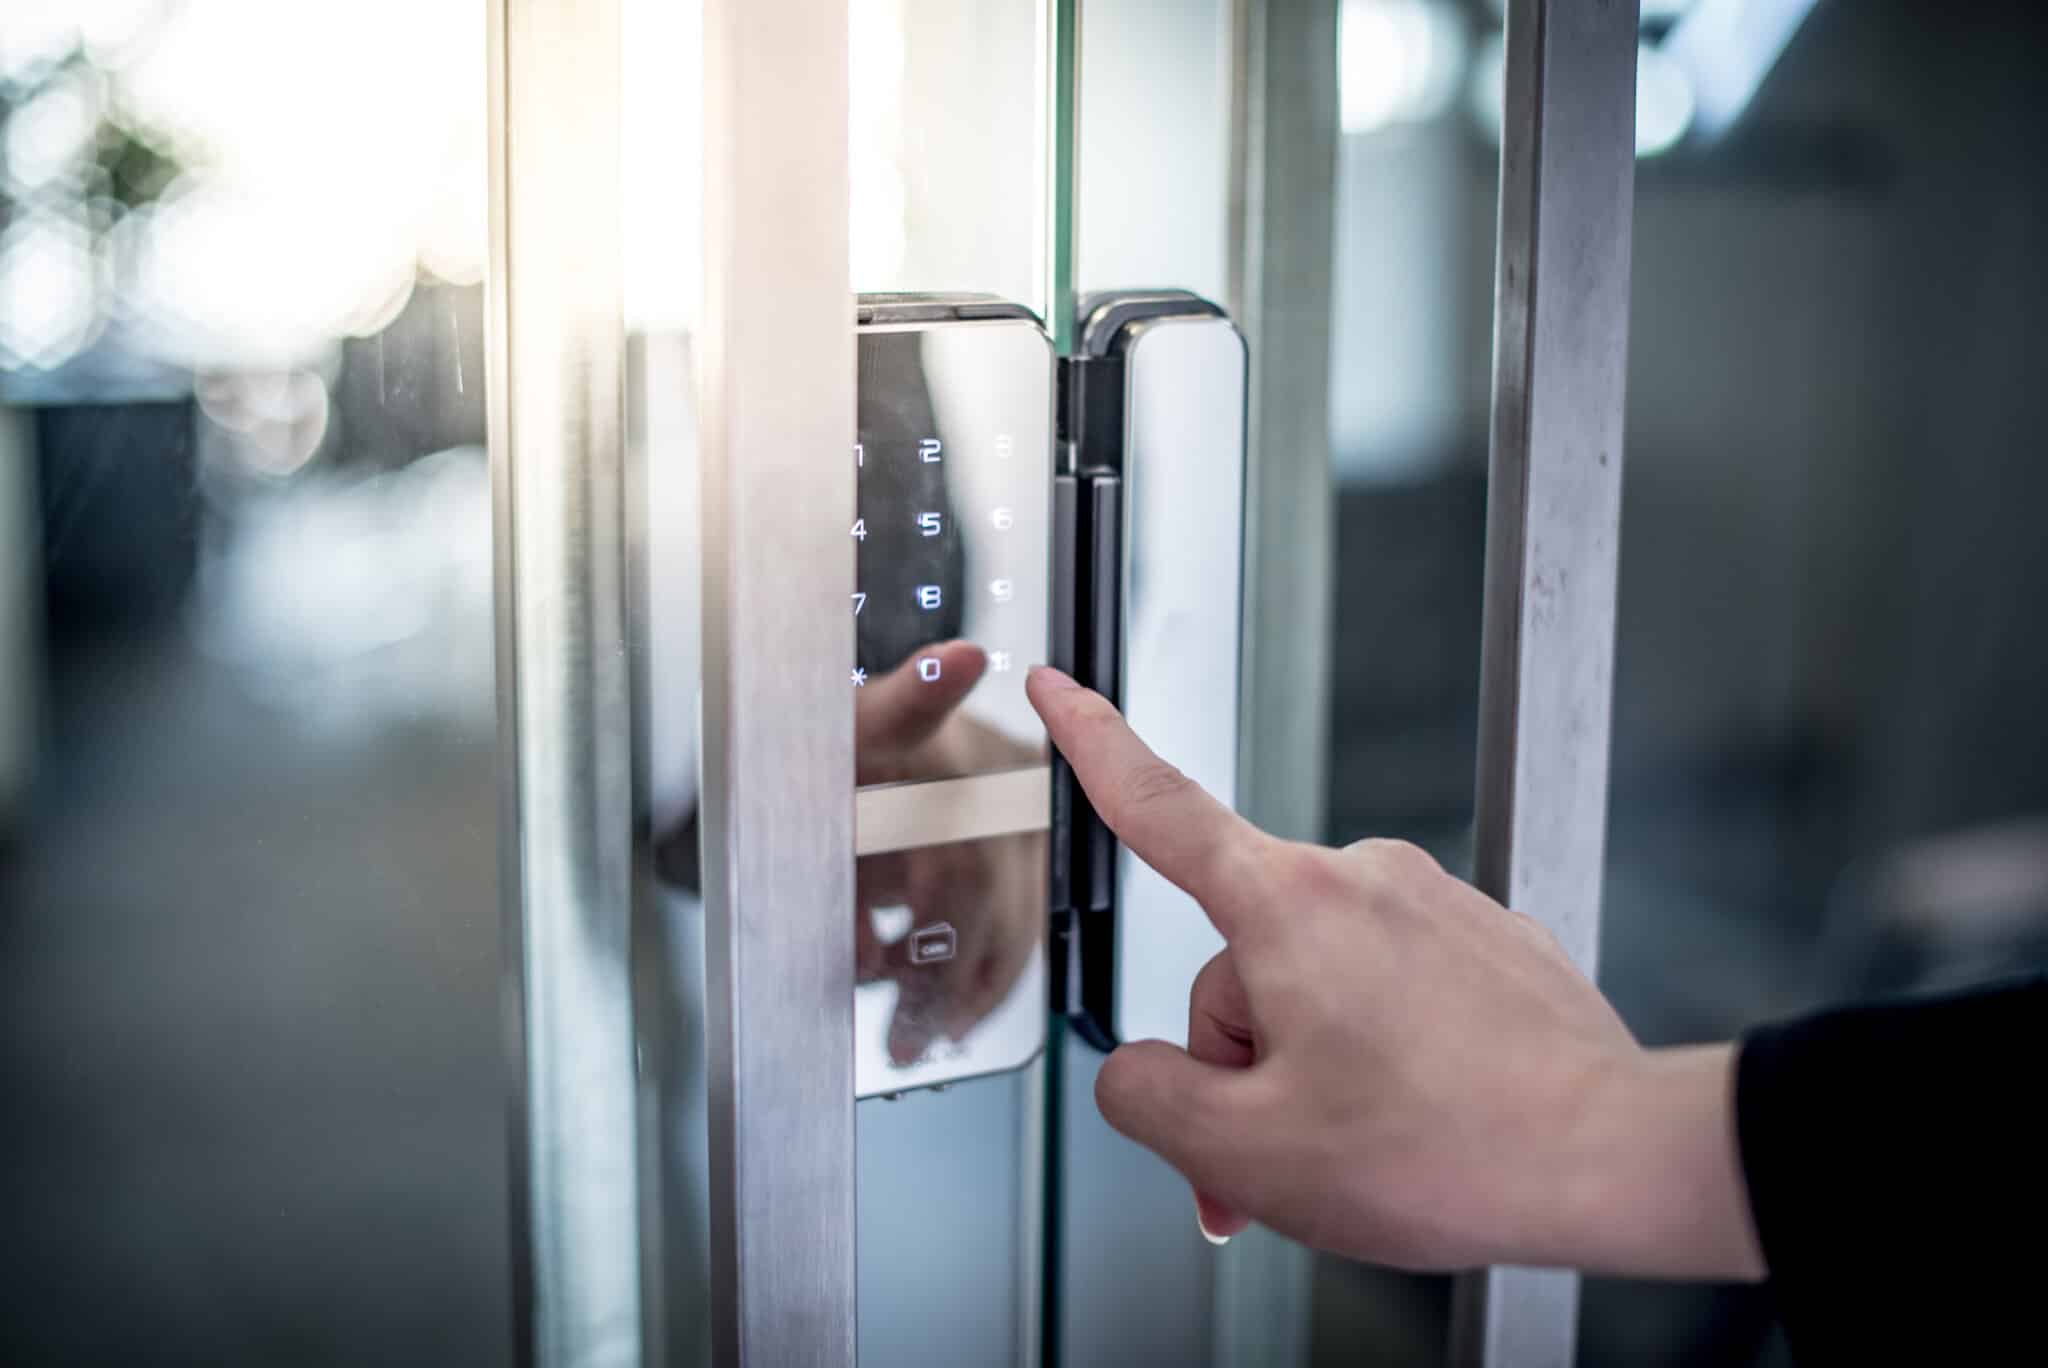 Persons pointer finger enters in their code on an access control door keypad to gain entry to a building.